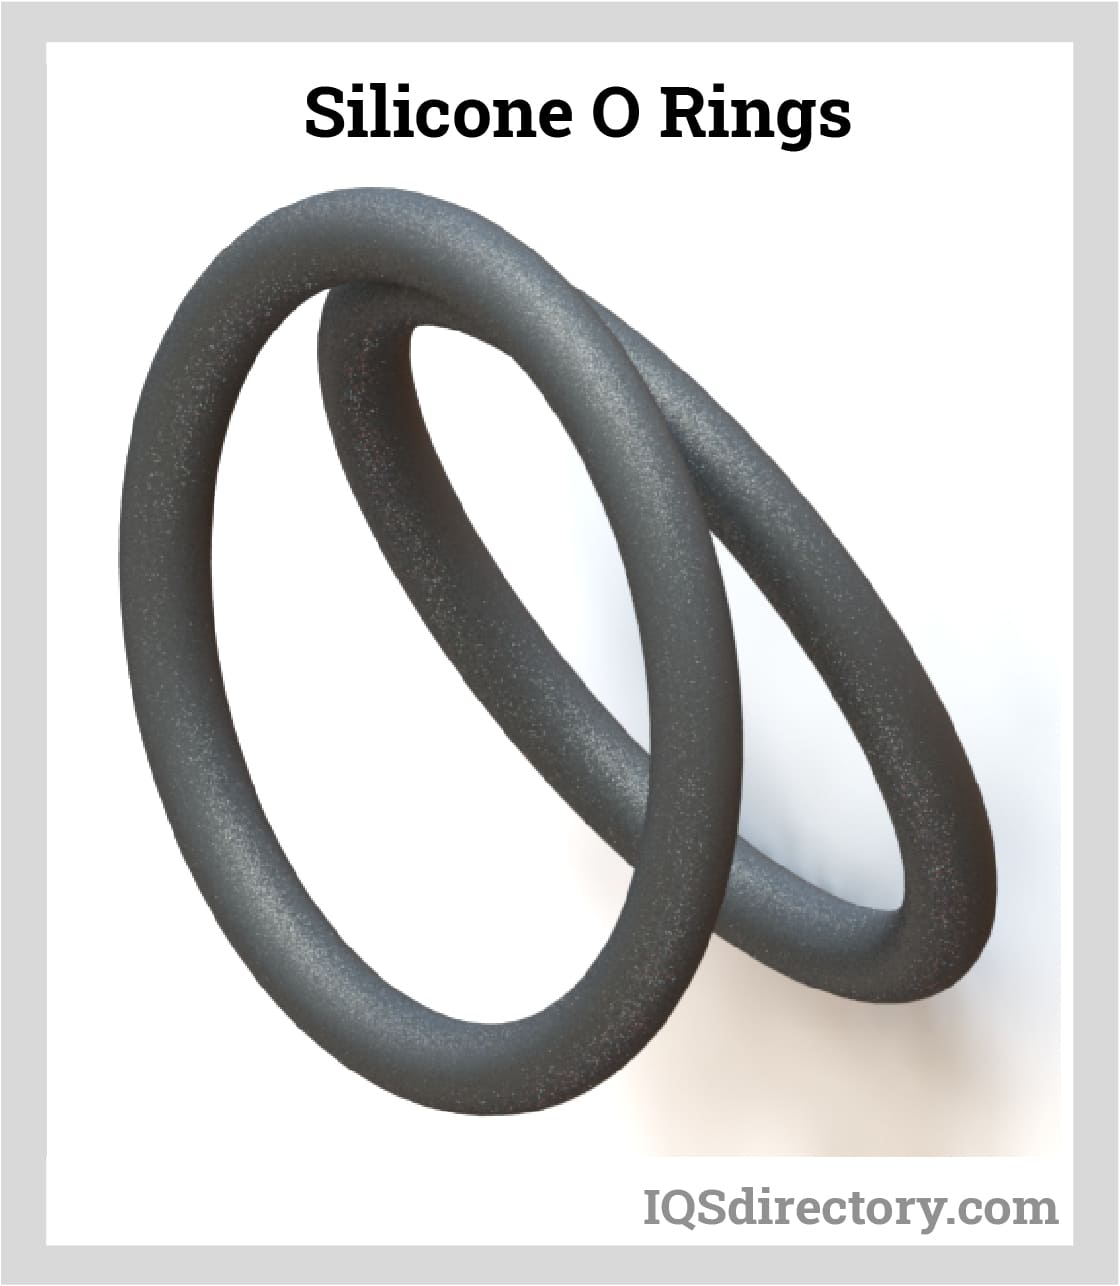 https://www.o-rings.org/wp-content/uploads/2022/10/silicone-rings.jpg